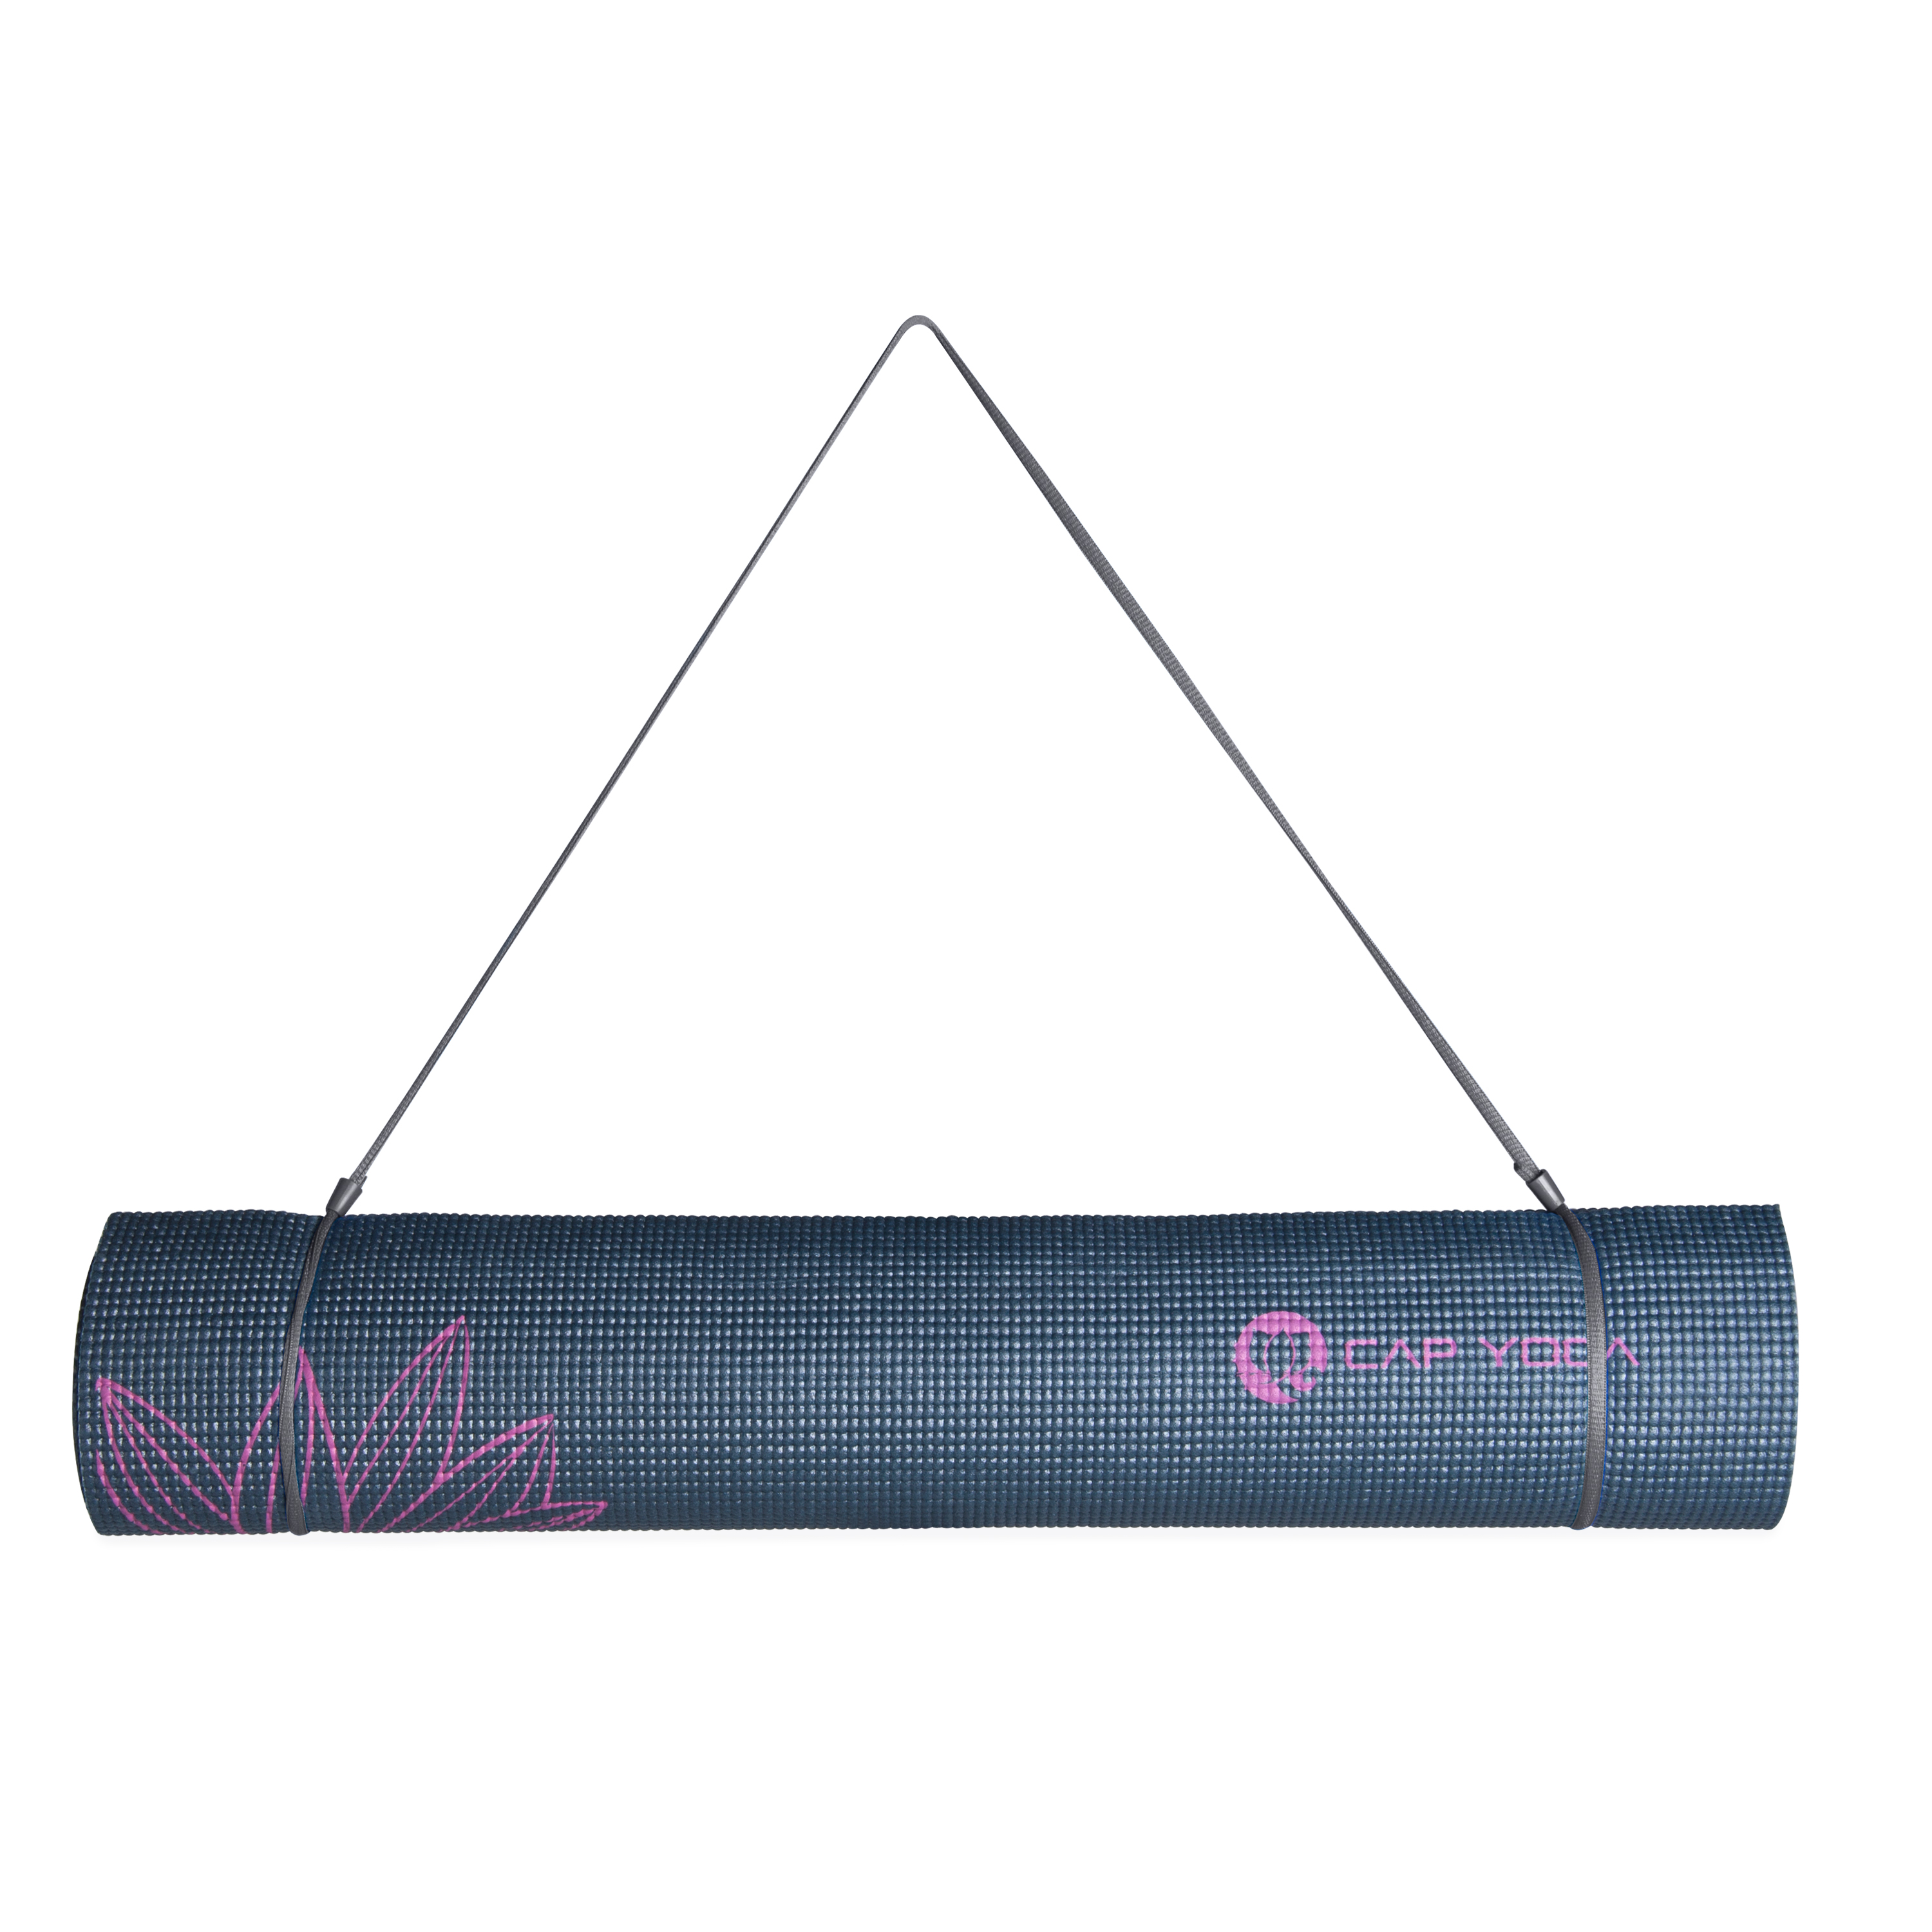 CAP 5mm Yoga Mat with Carry Strap, Dahlia - image 2 of 4